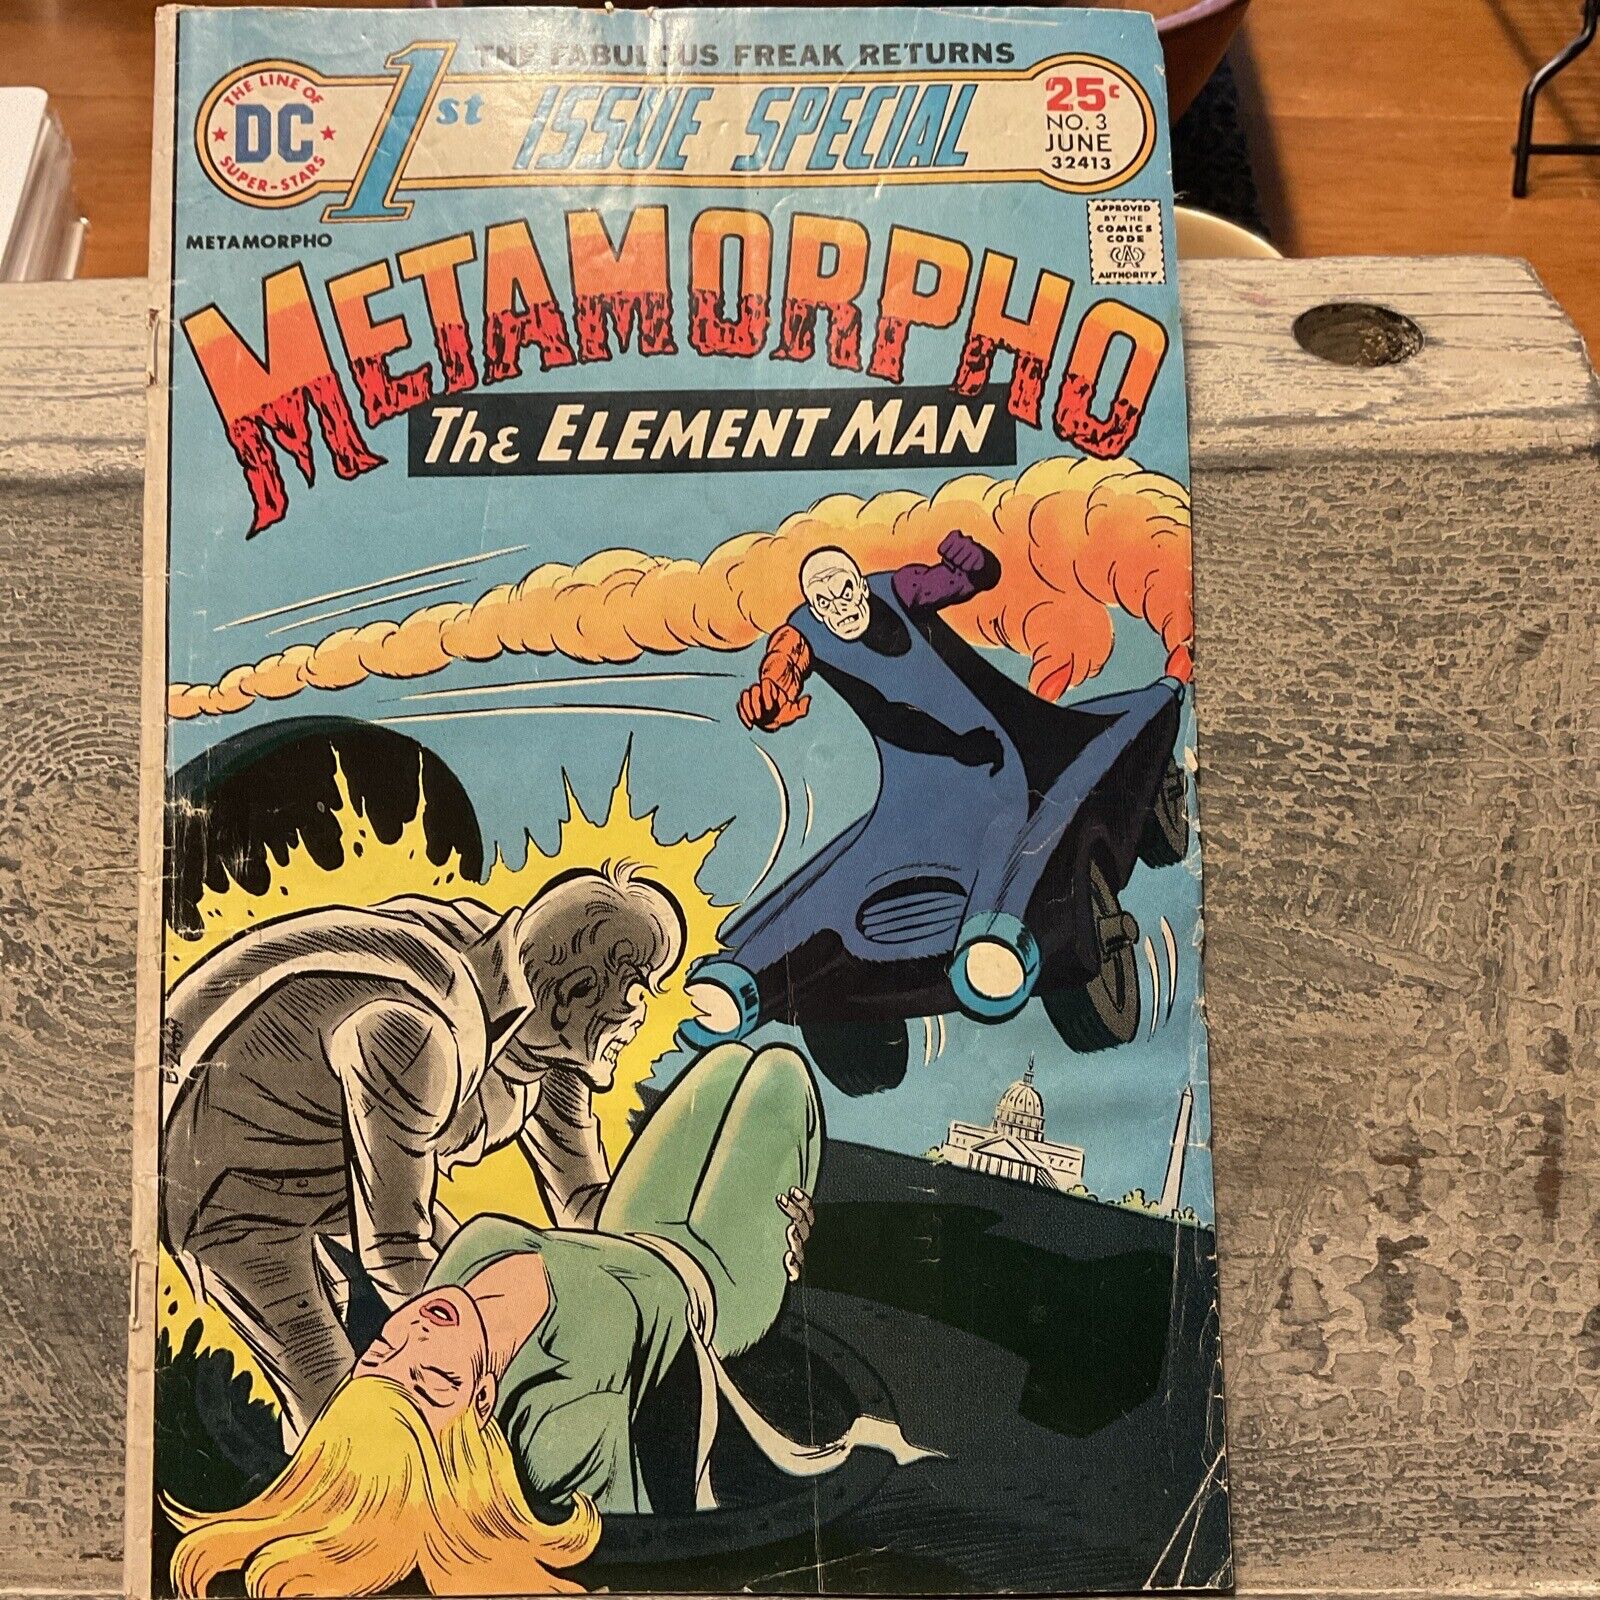 1st Issue Special #3 Metamorpho the element man - 1975 DC Comics